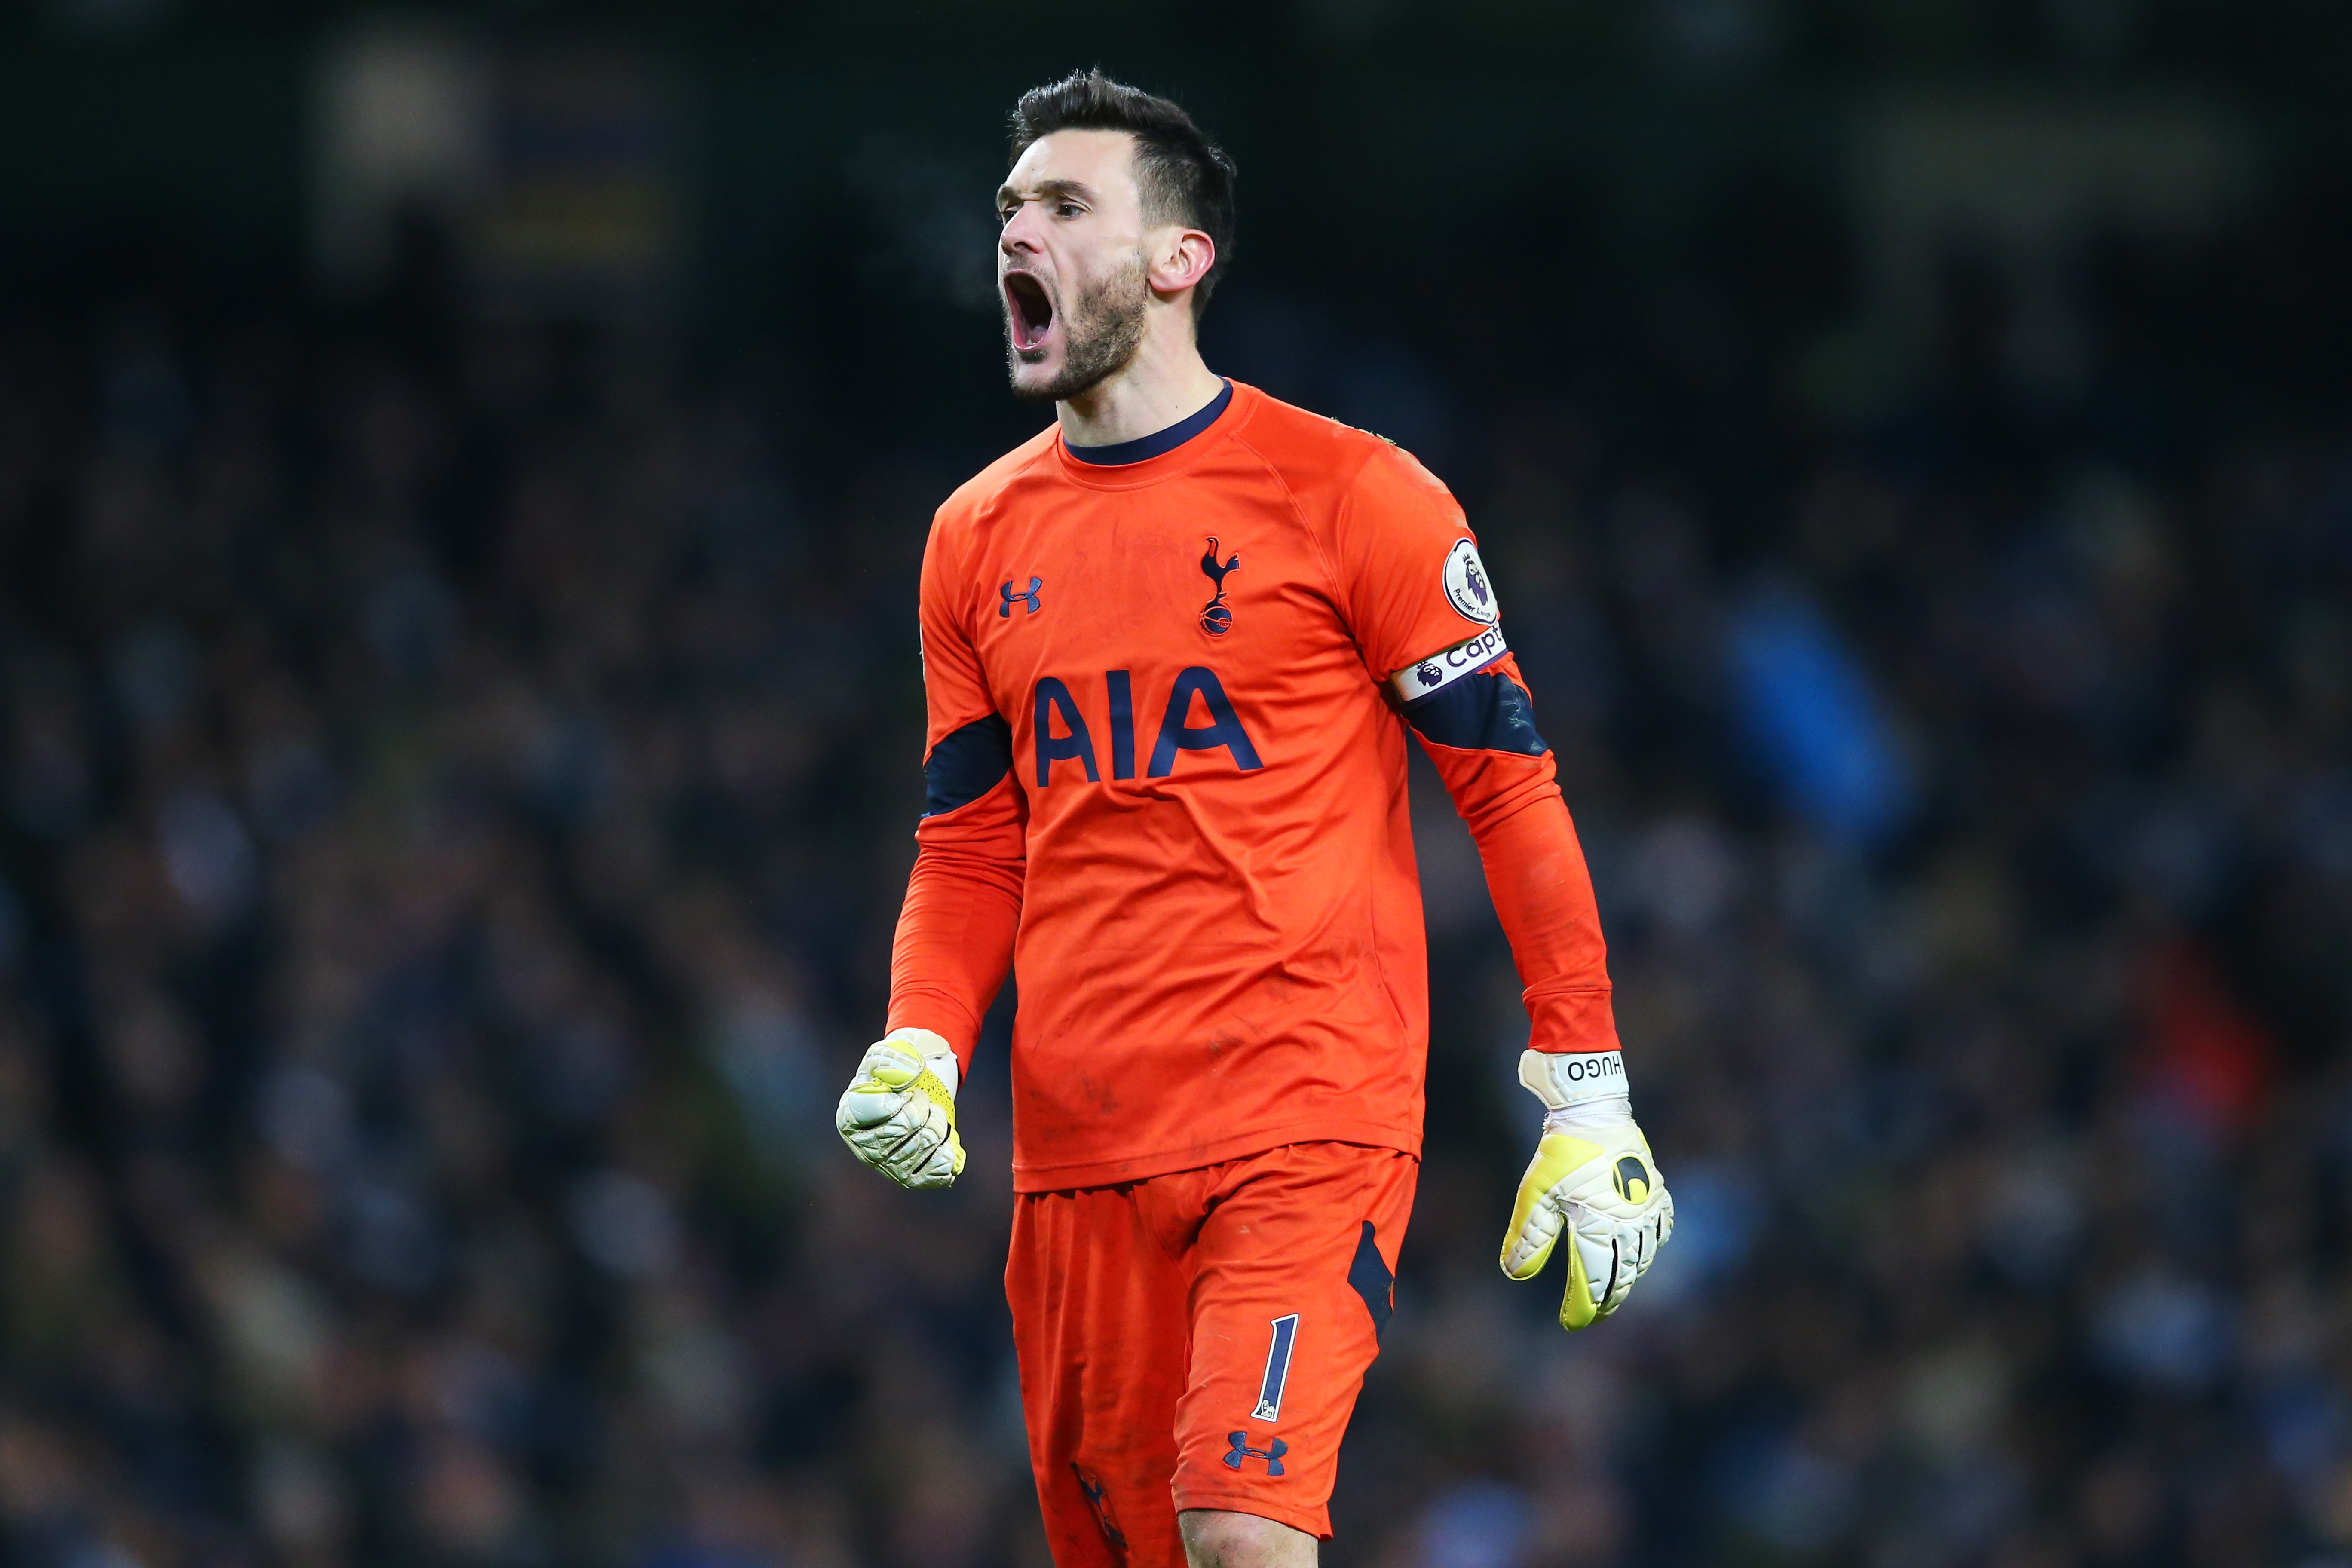 MANCHESTER, ENGLAND - JANUARY 21: Hugo Lloris of Tottenham Hotspur celebrates his sides second goal during the Premier League match between Manchester City and Tottenham Hotspur at the Etihad Stadium on January 21, 2017 in Manchester, England.  (Photo by Alex Livesey/Getty Images)